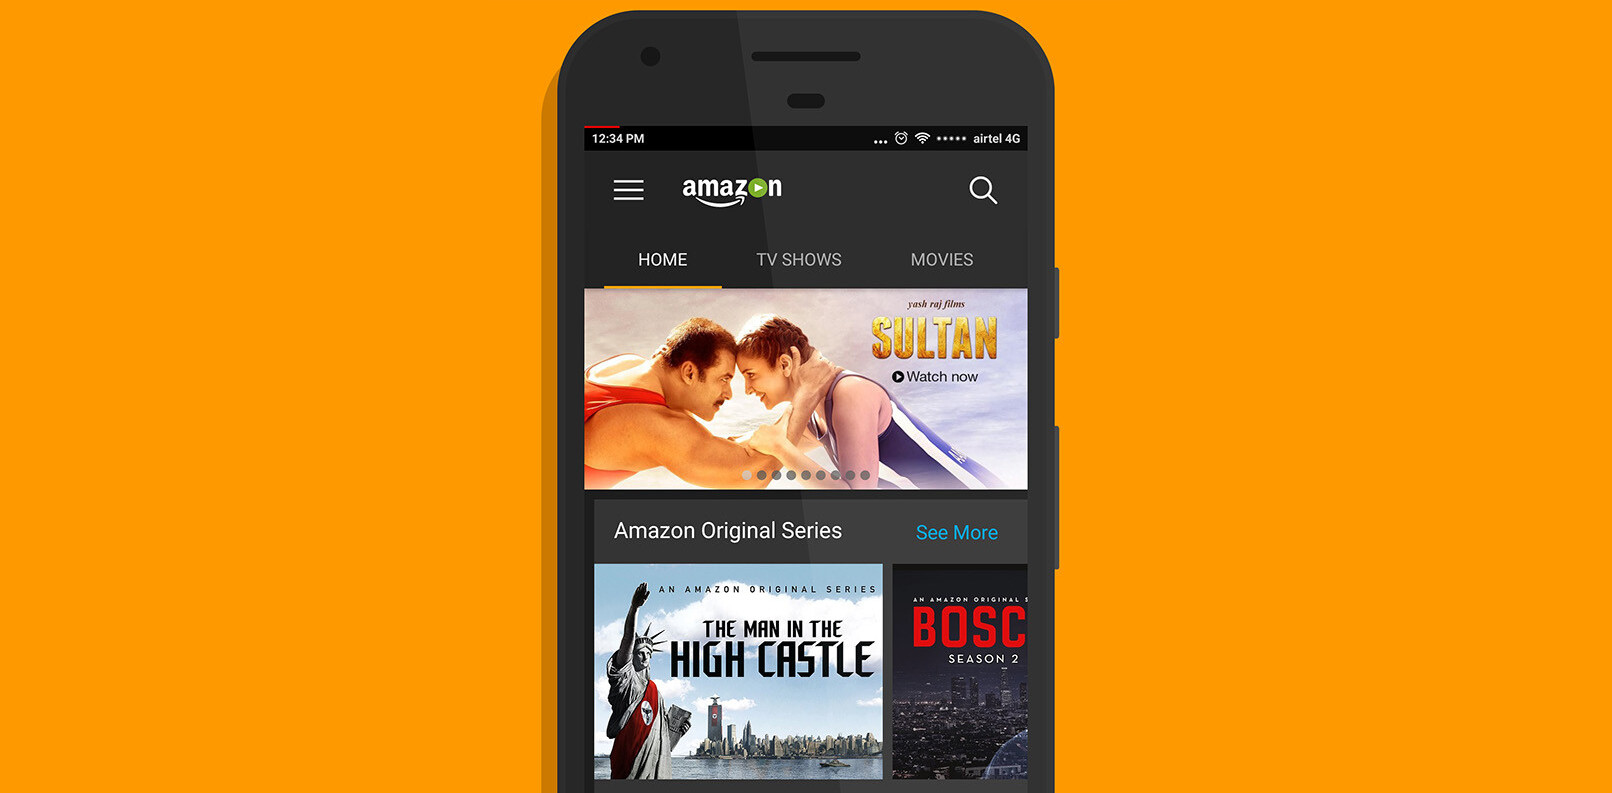 Amazon Prime now lets you buy movies on its iOS apps — here’s how